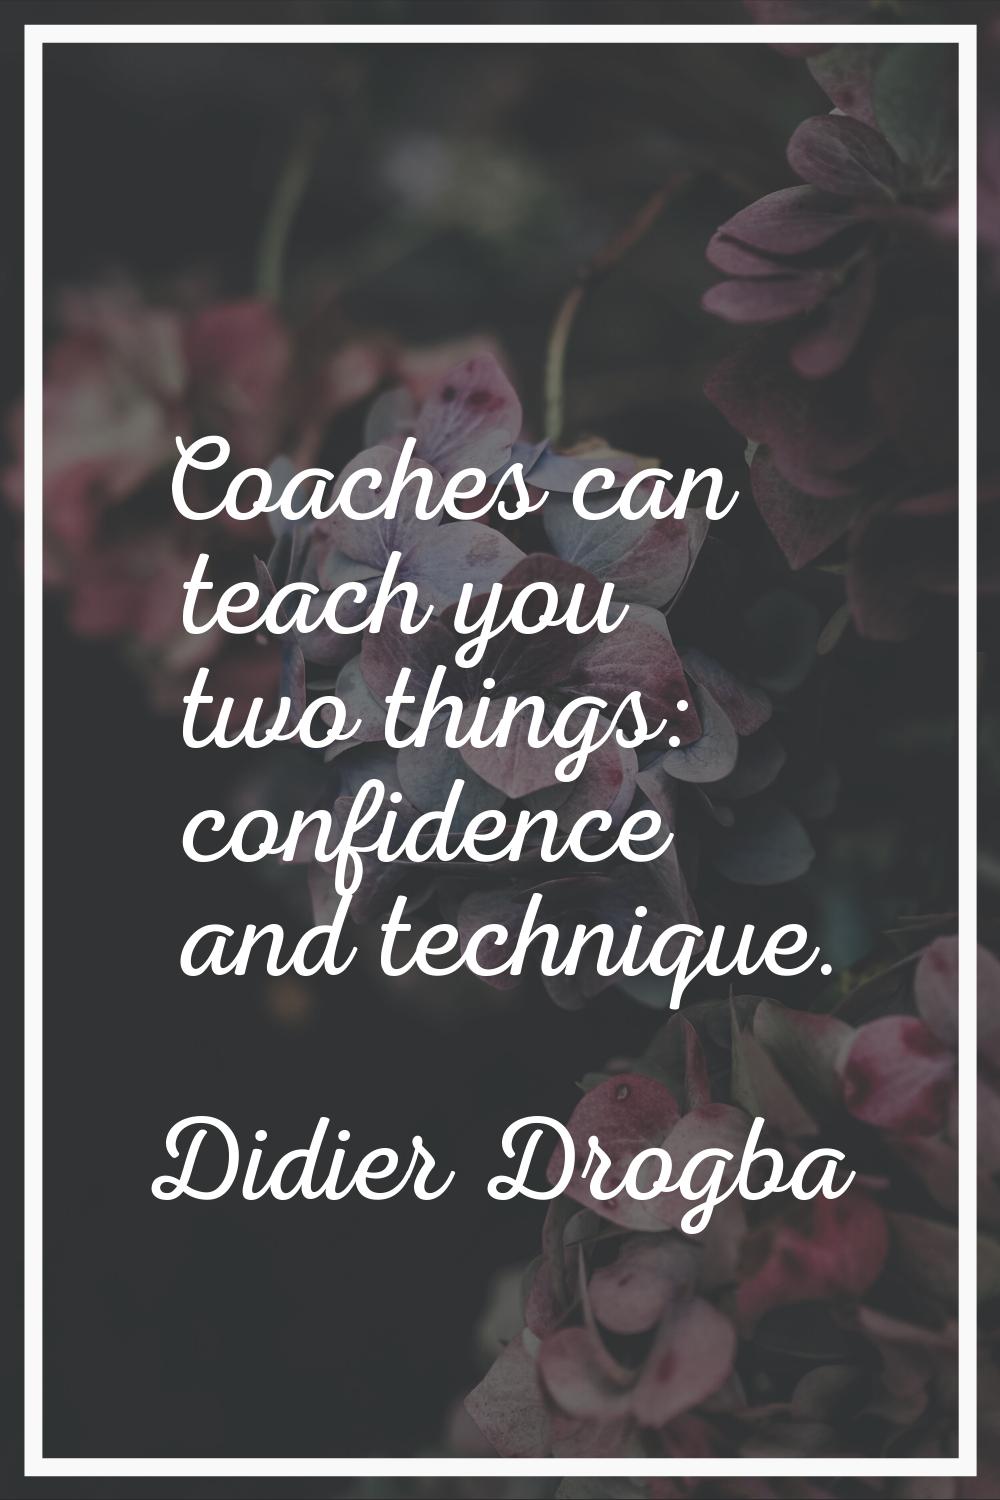 Coaches can teach you two things: confidence and technique.